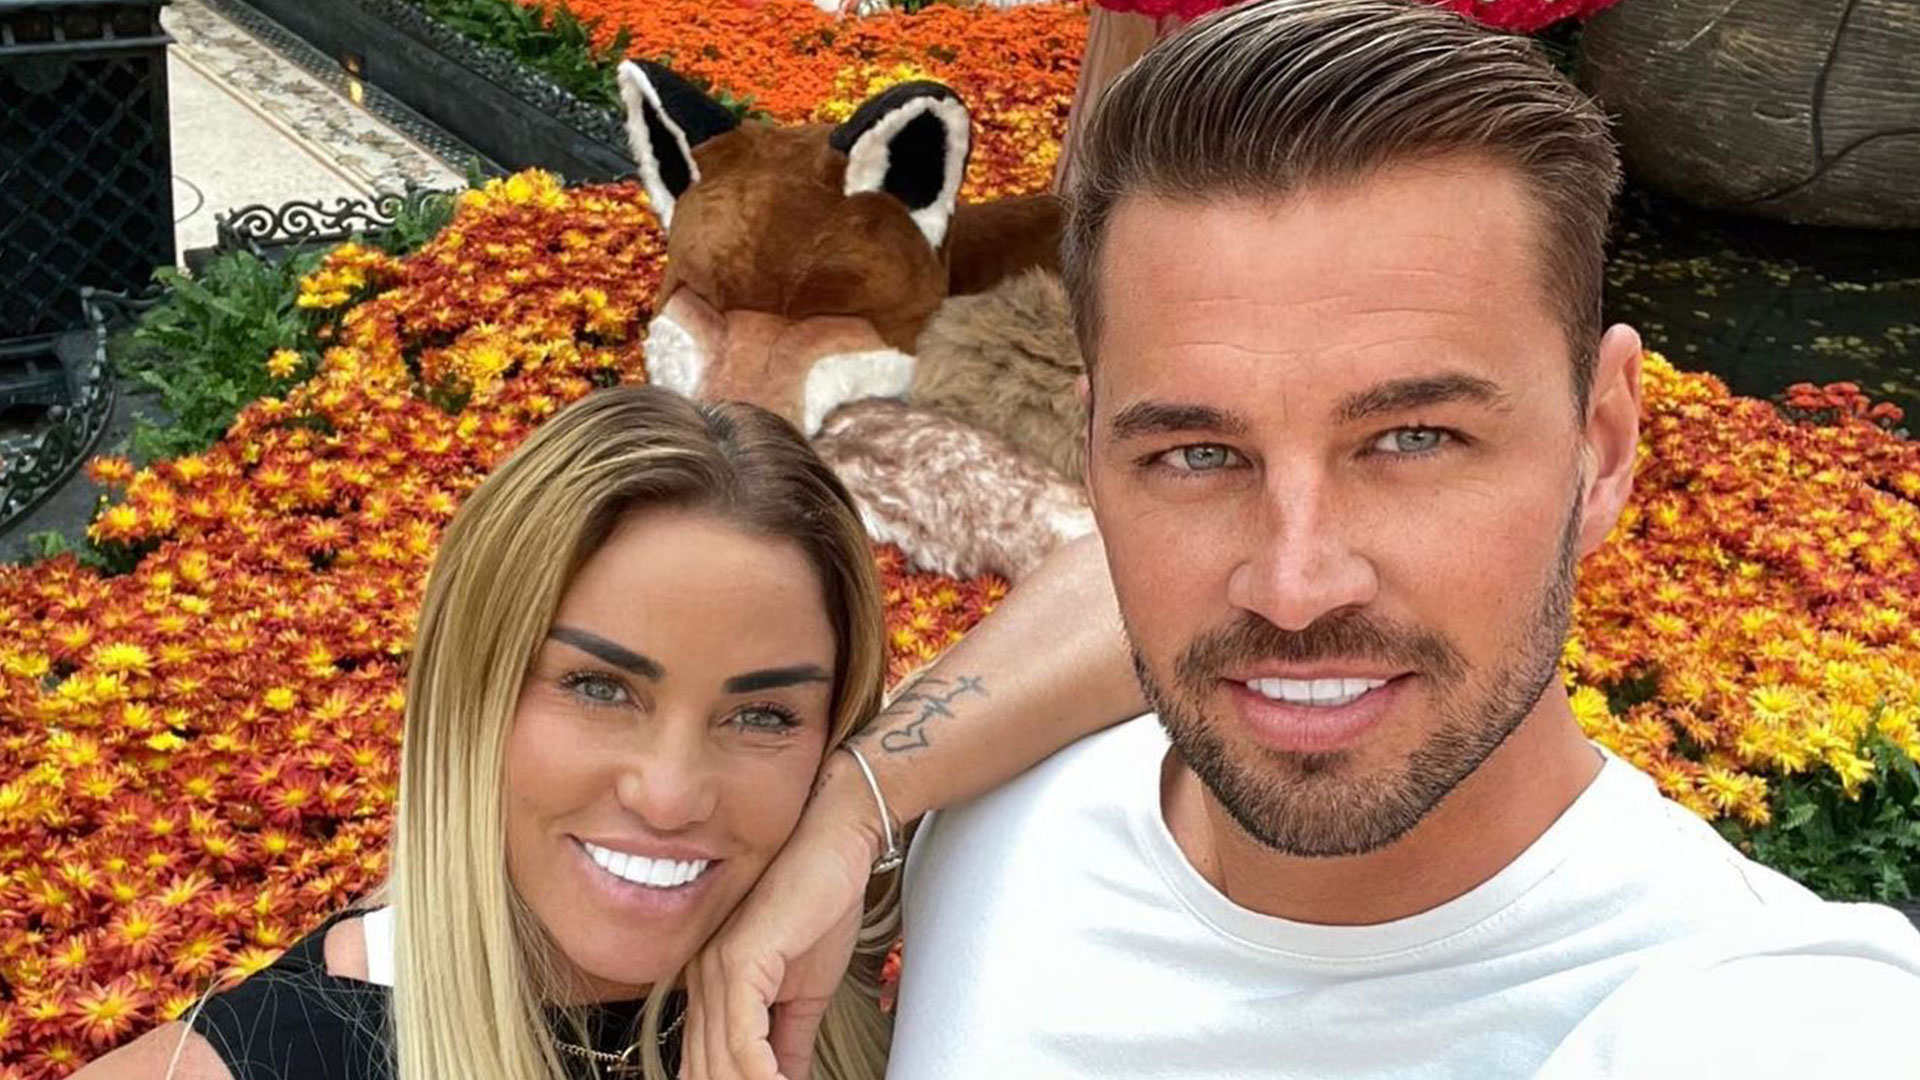 Katie Price ‘will get married abroad in lavish Spanish or Italian wedding’ – despite bankruptcy